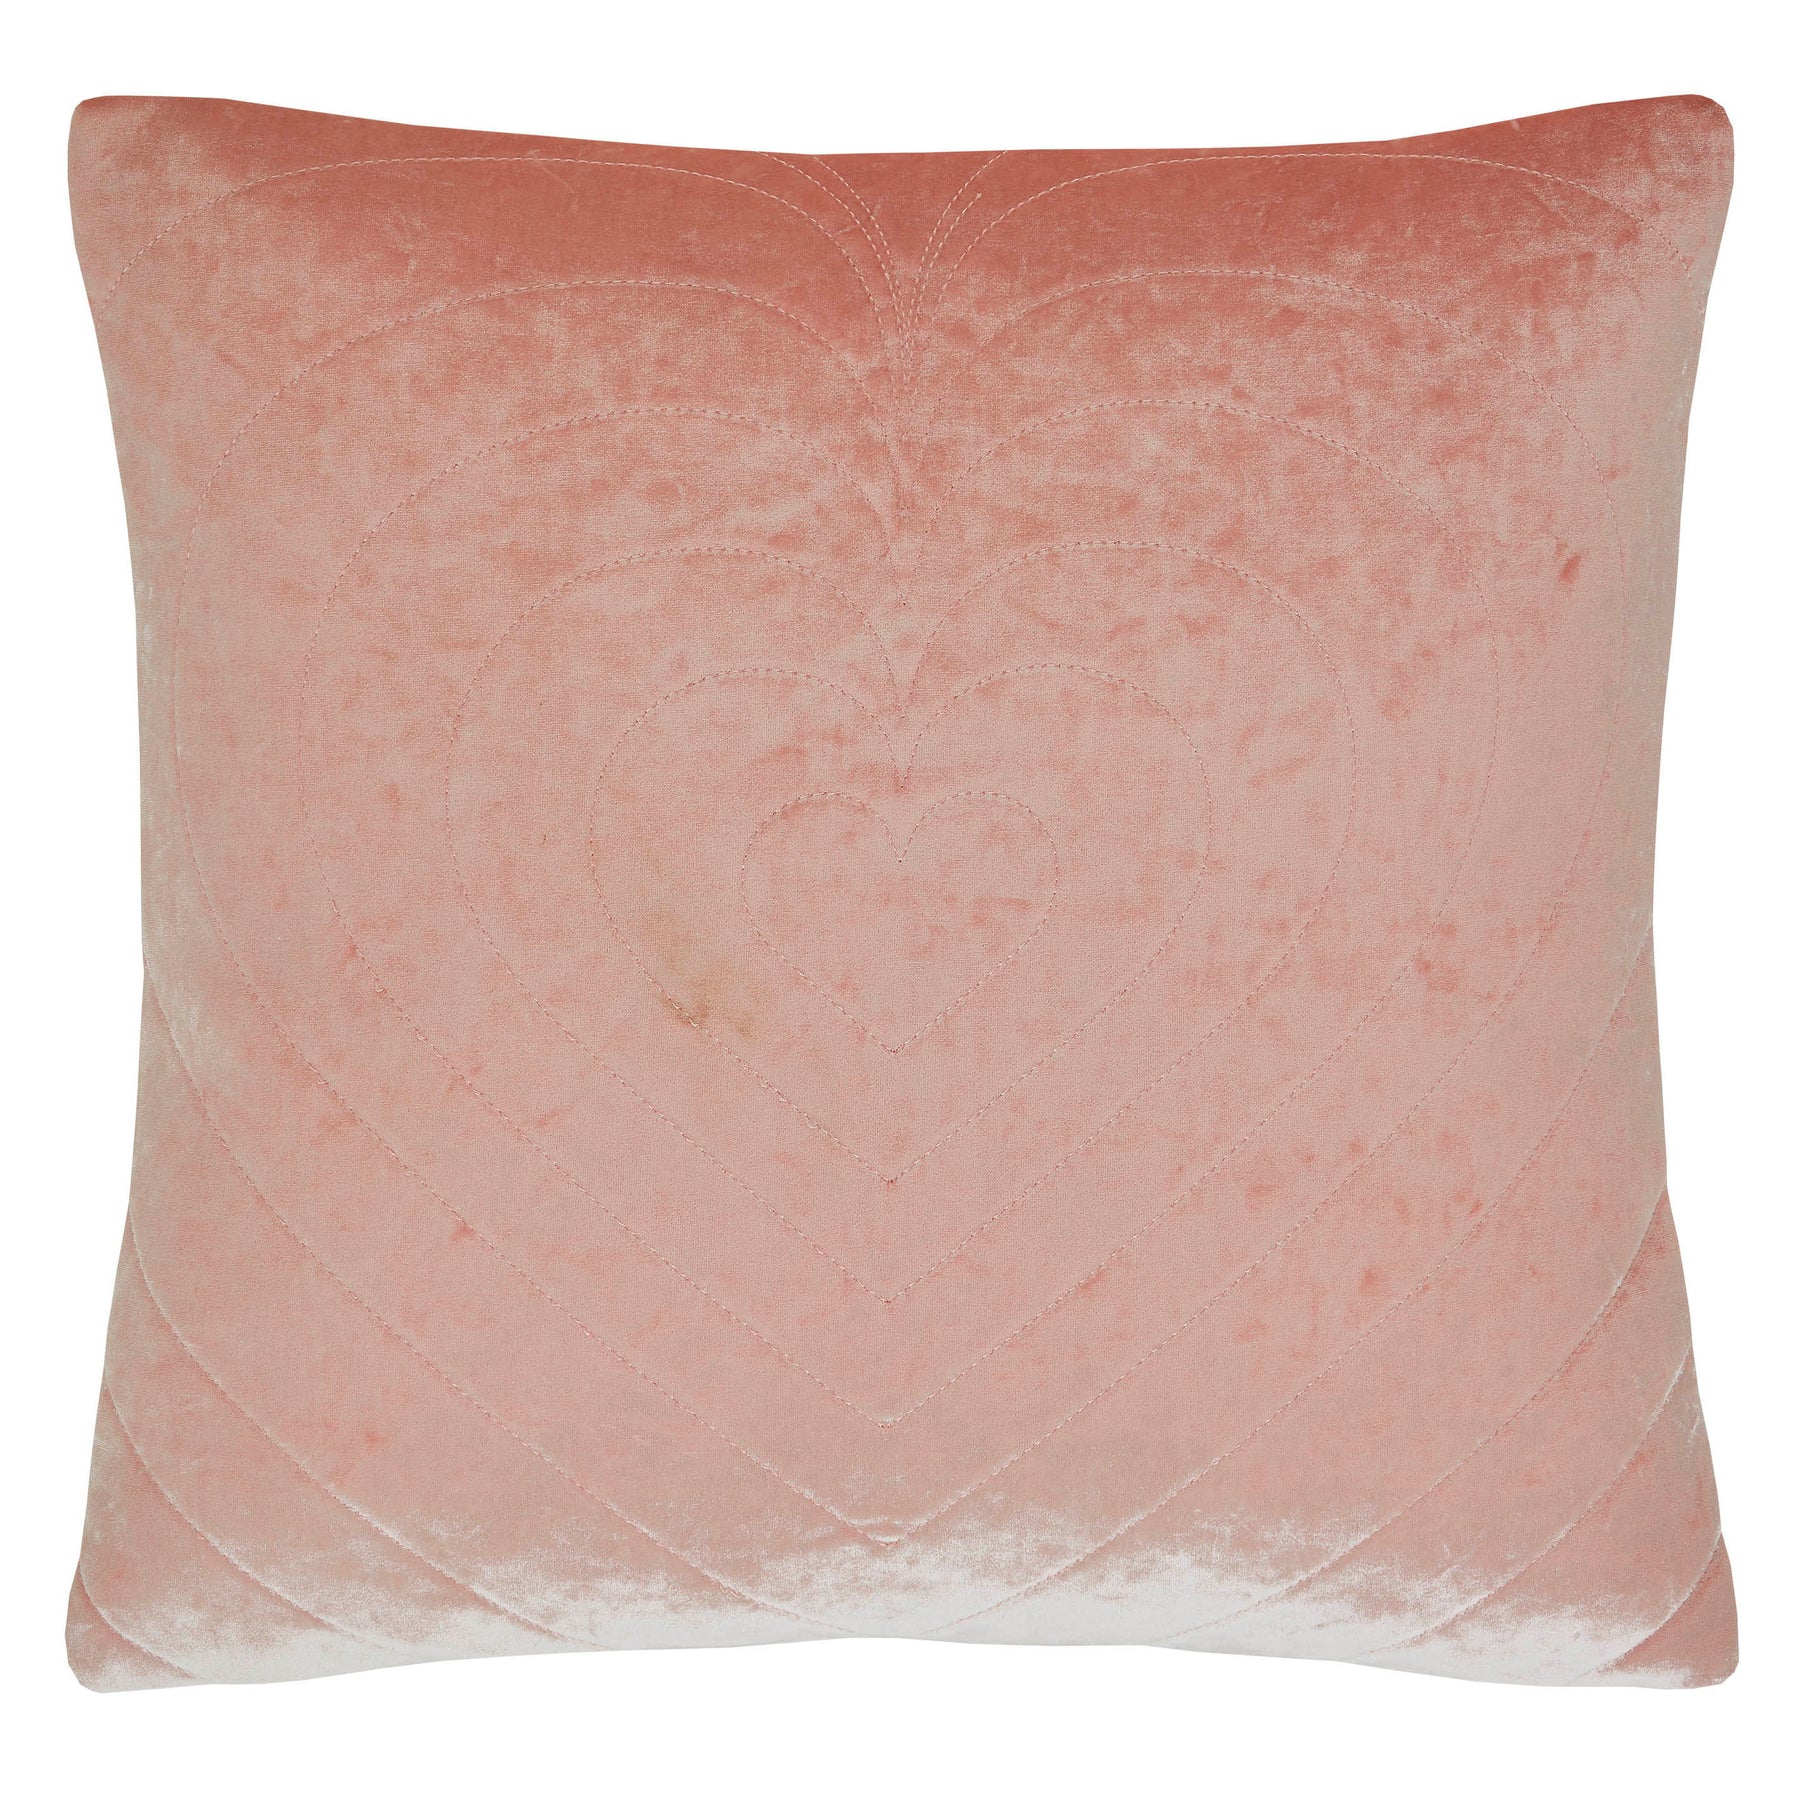 Skinny Dip Embroidered Heart Cushion - Pink